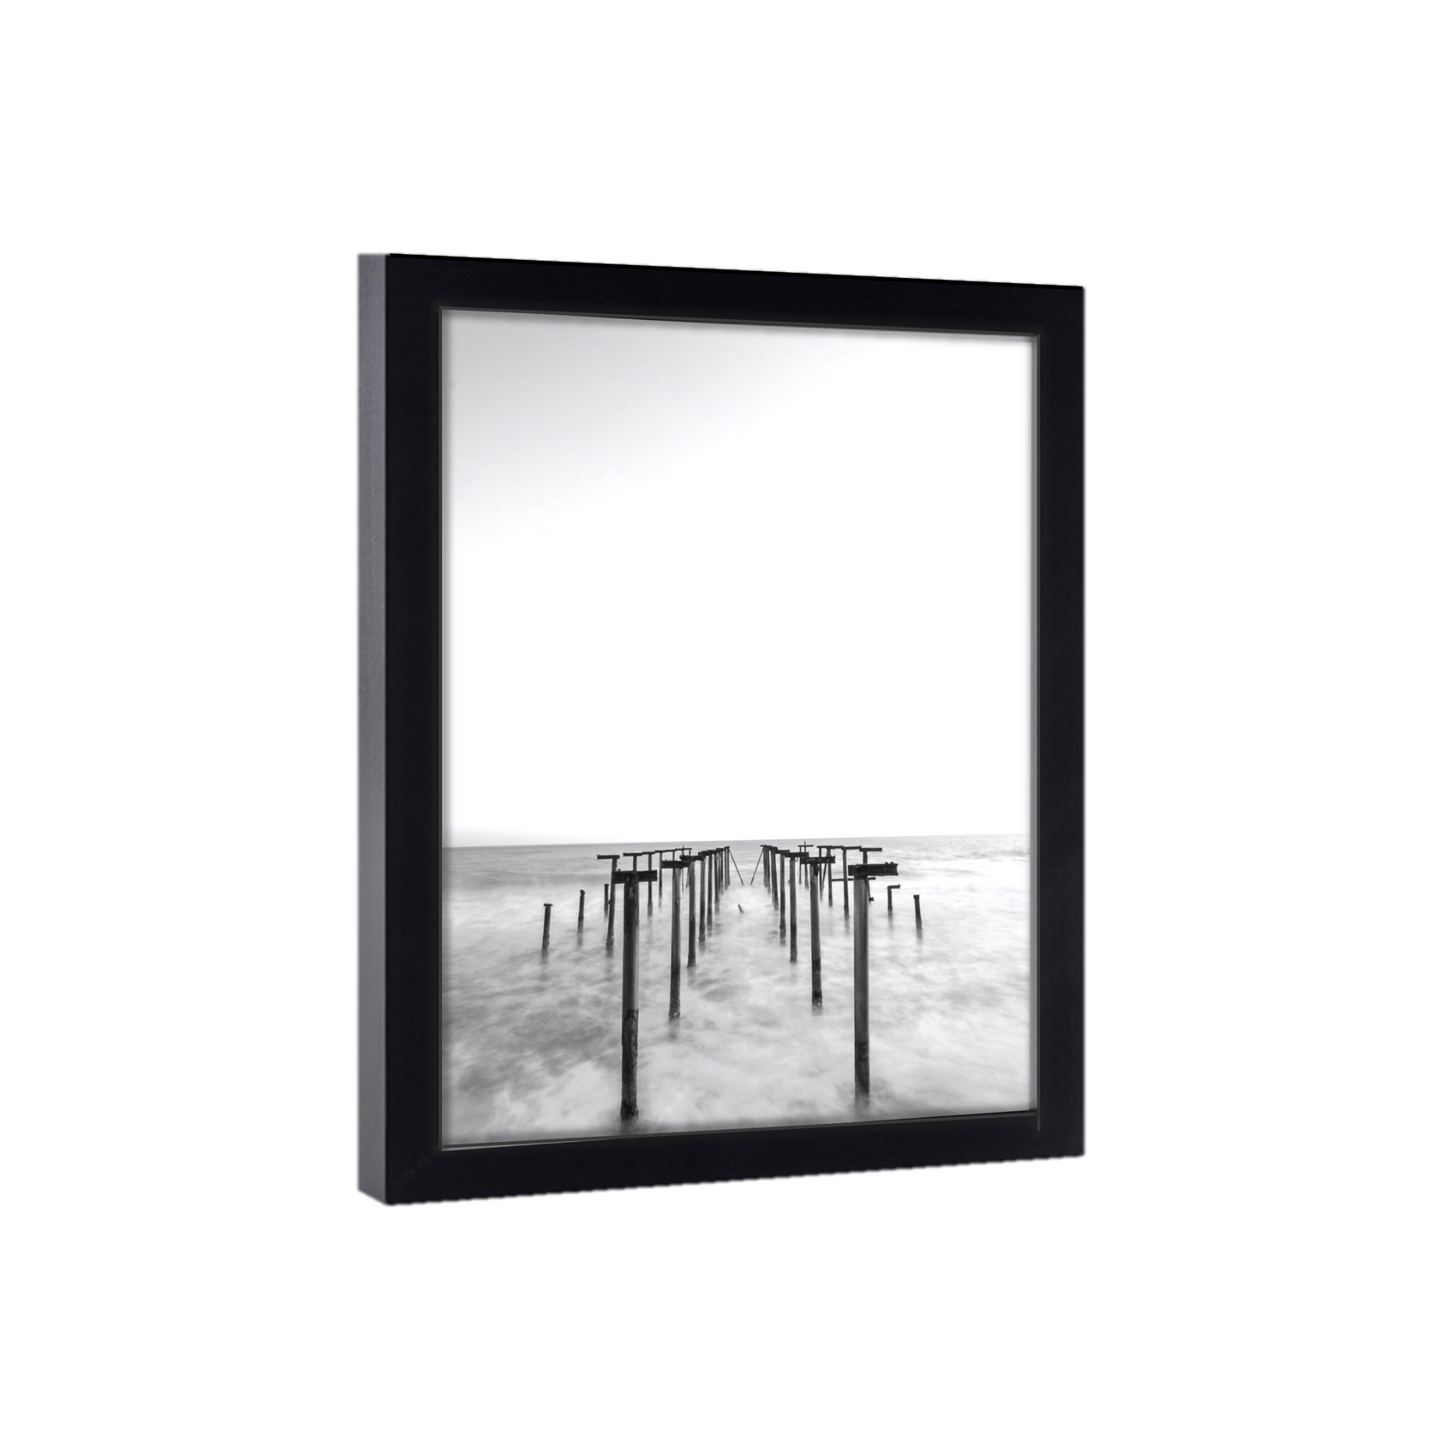 Gallery Wall 12x34 Picture Frame Black Wood 12x34  Poster Size